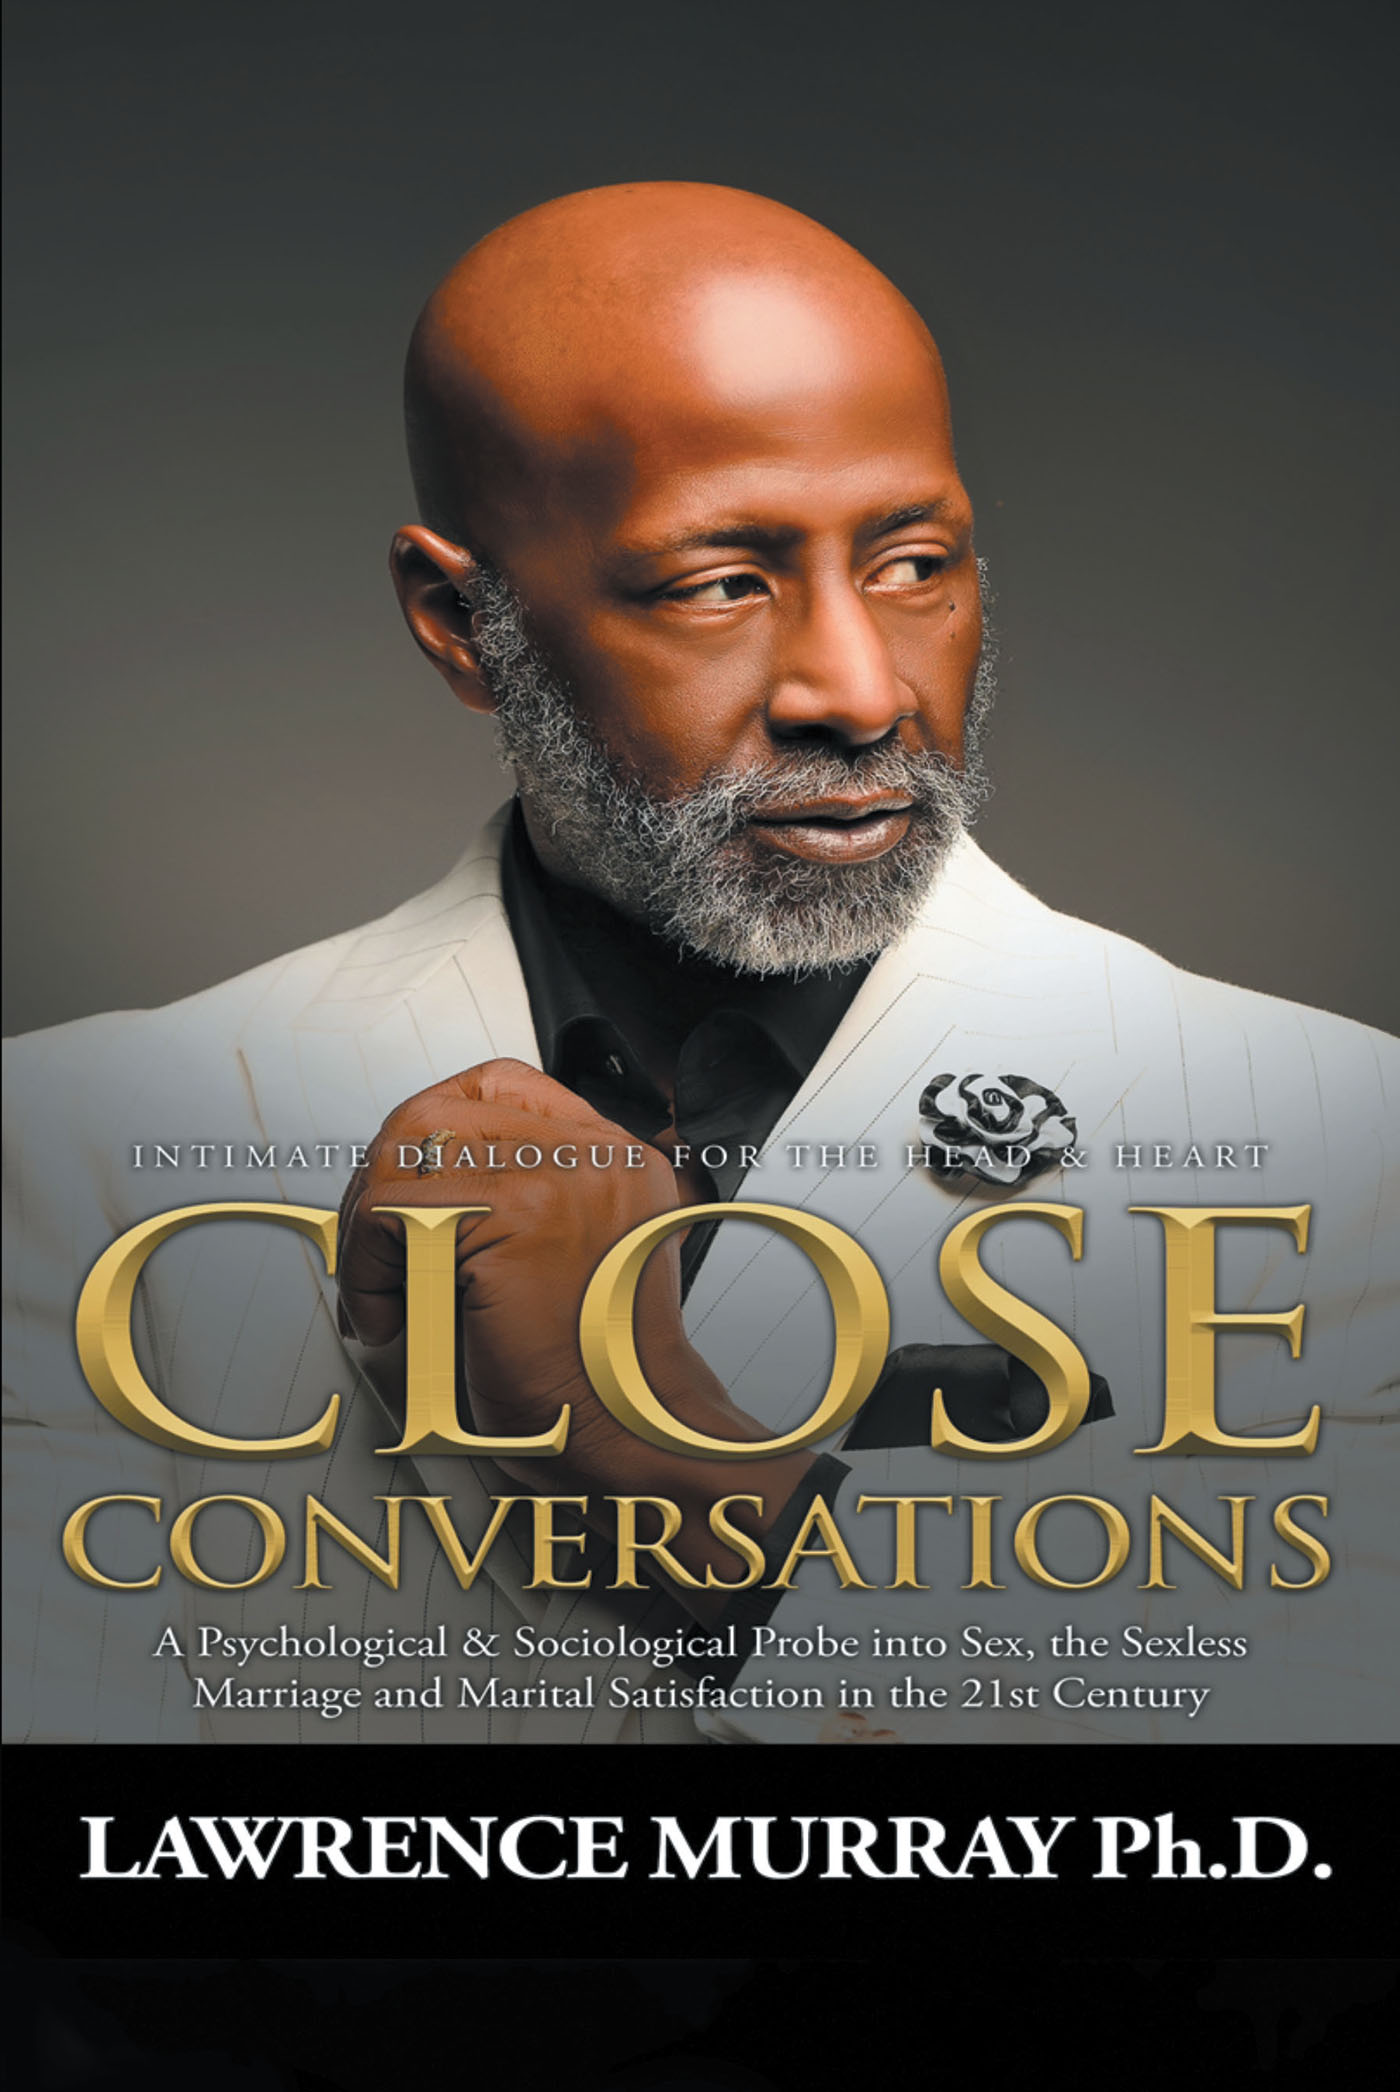 Author Lawrence Murray, Ph.D.’s New Book, “Close Conversations,” is a Fascinating Exploration of Sex, the Sexless Marriage, and Marital Satisfaction